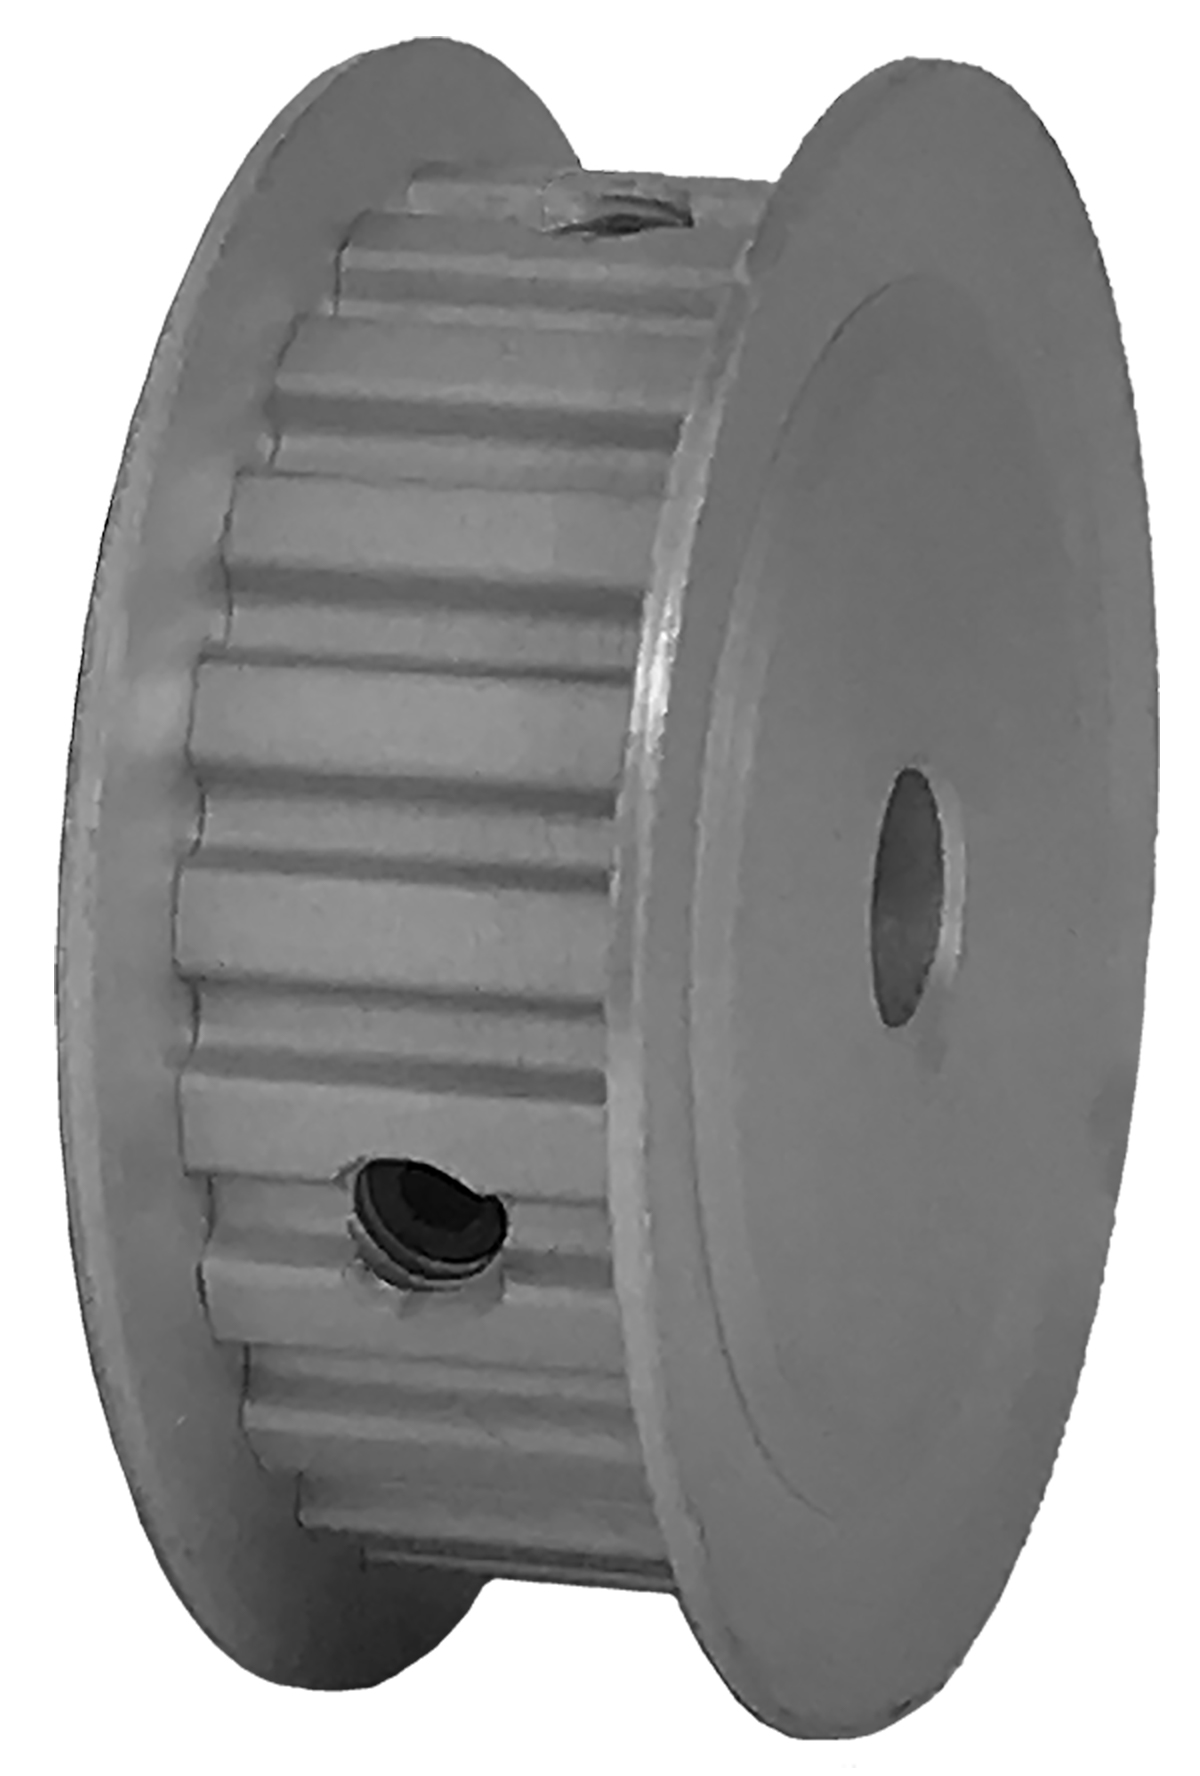 22XL037-3FA3 - Aluminum Imperial Pitch Pulleys